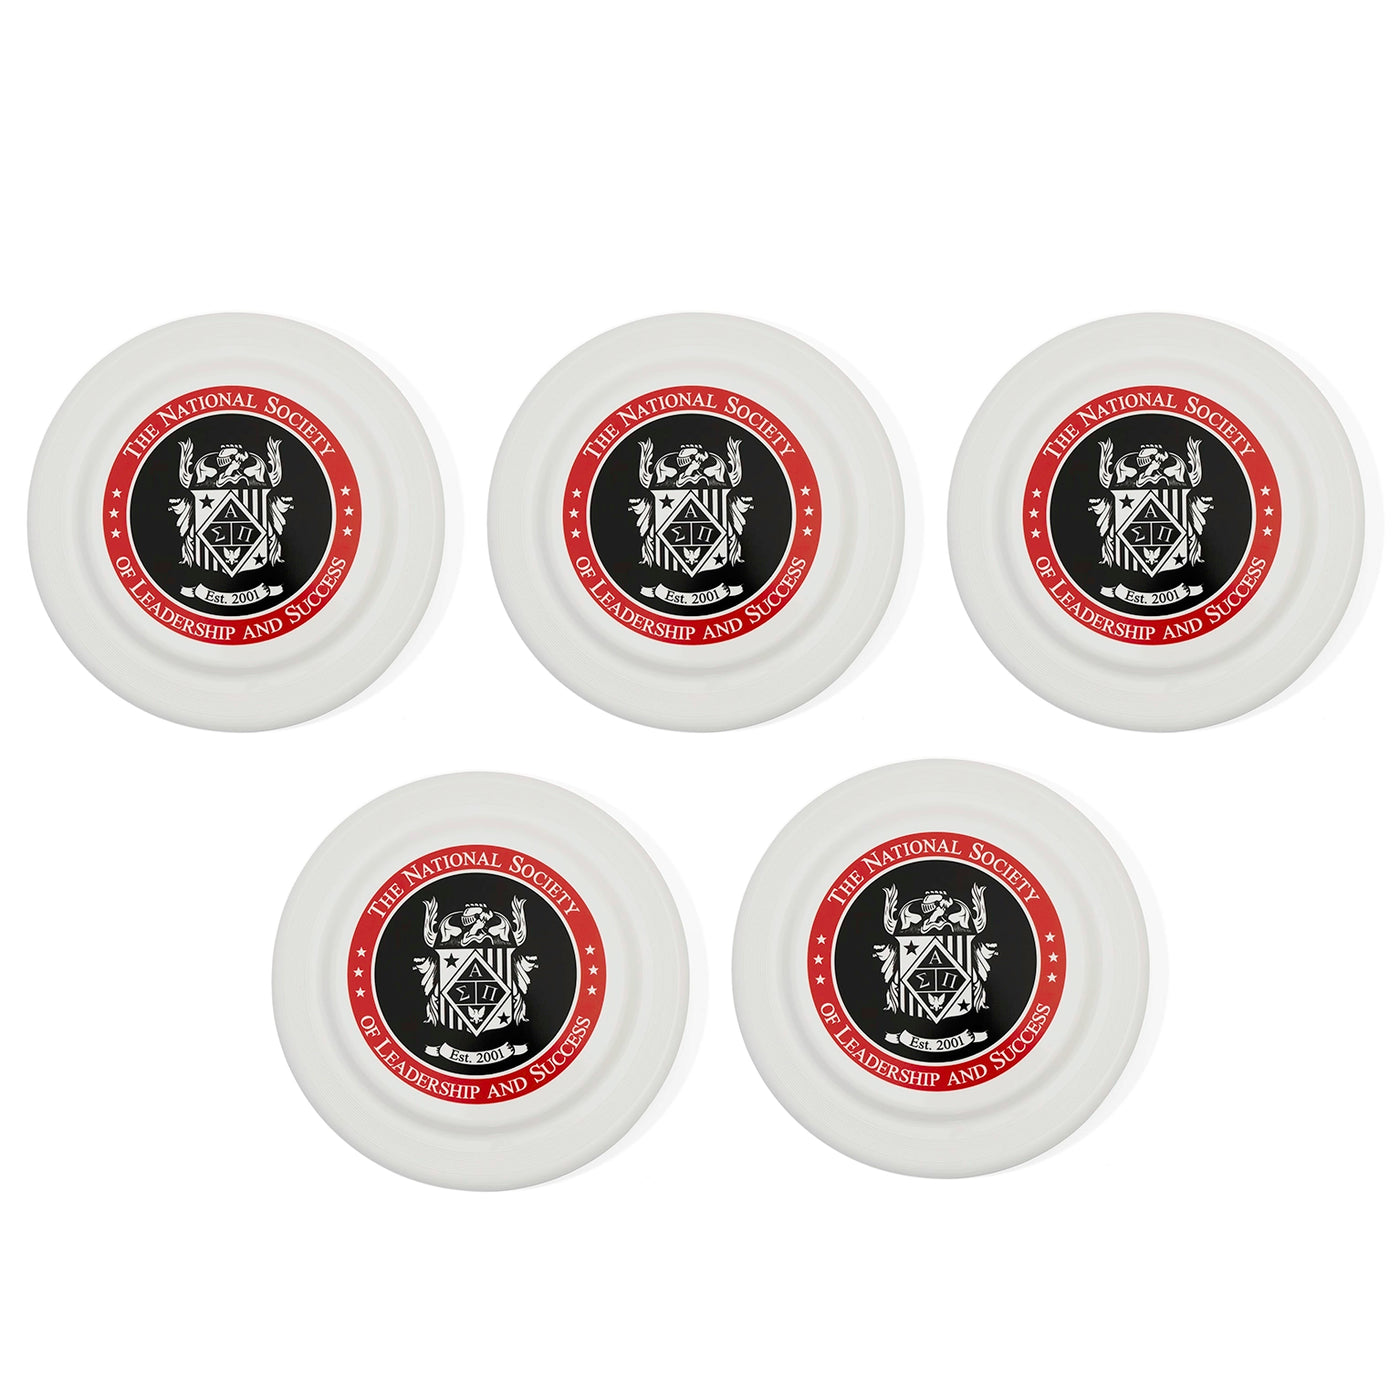 NSLS Frisbee (Pack of 5 Save 20%)